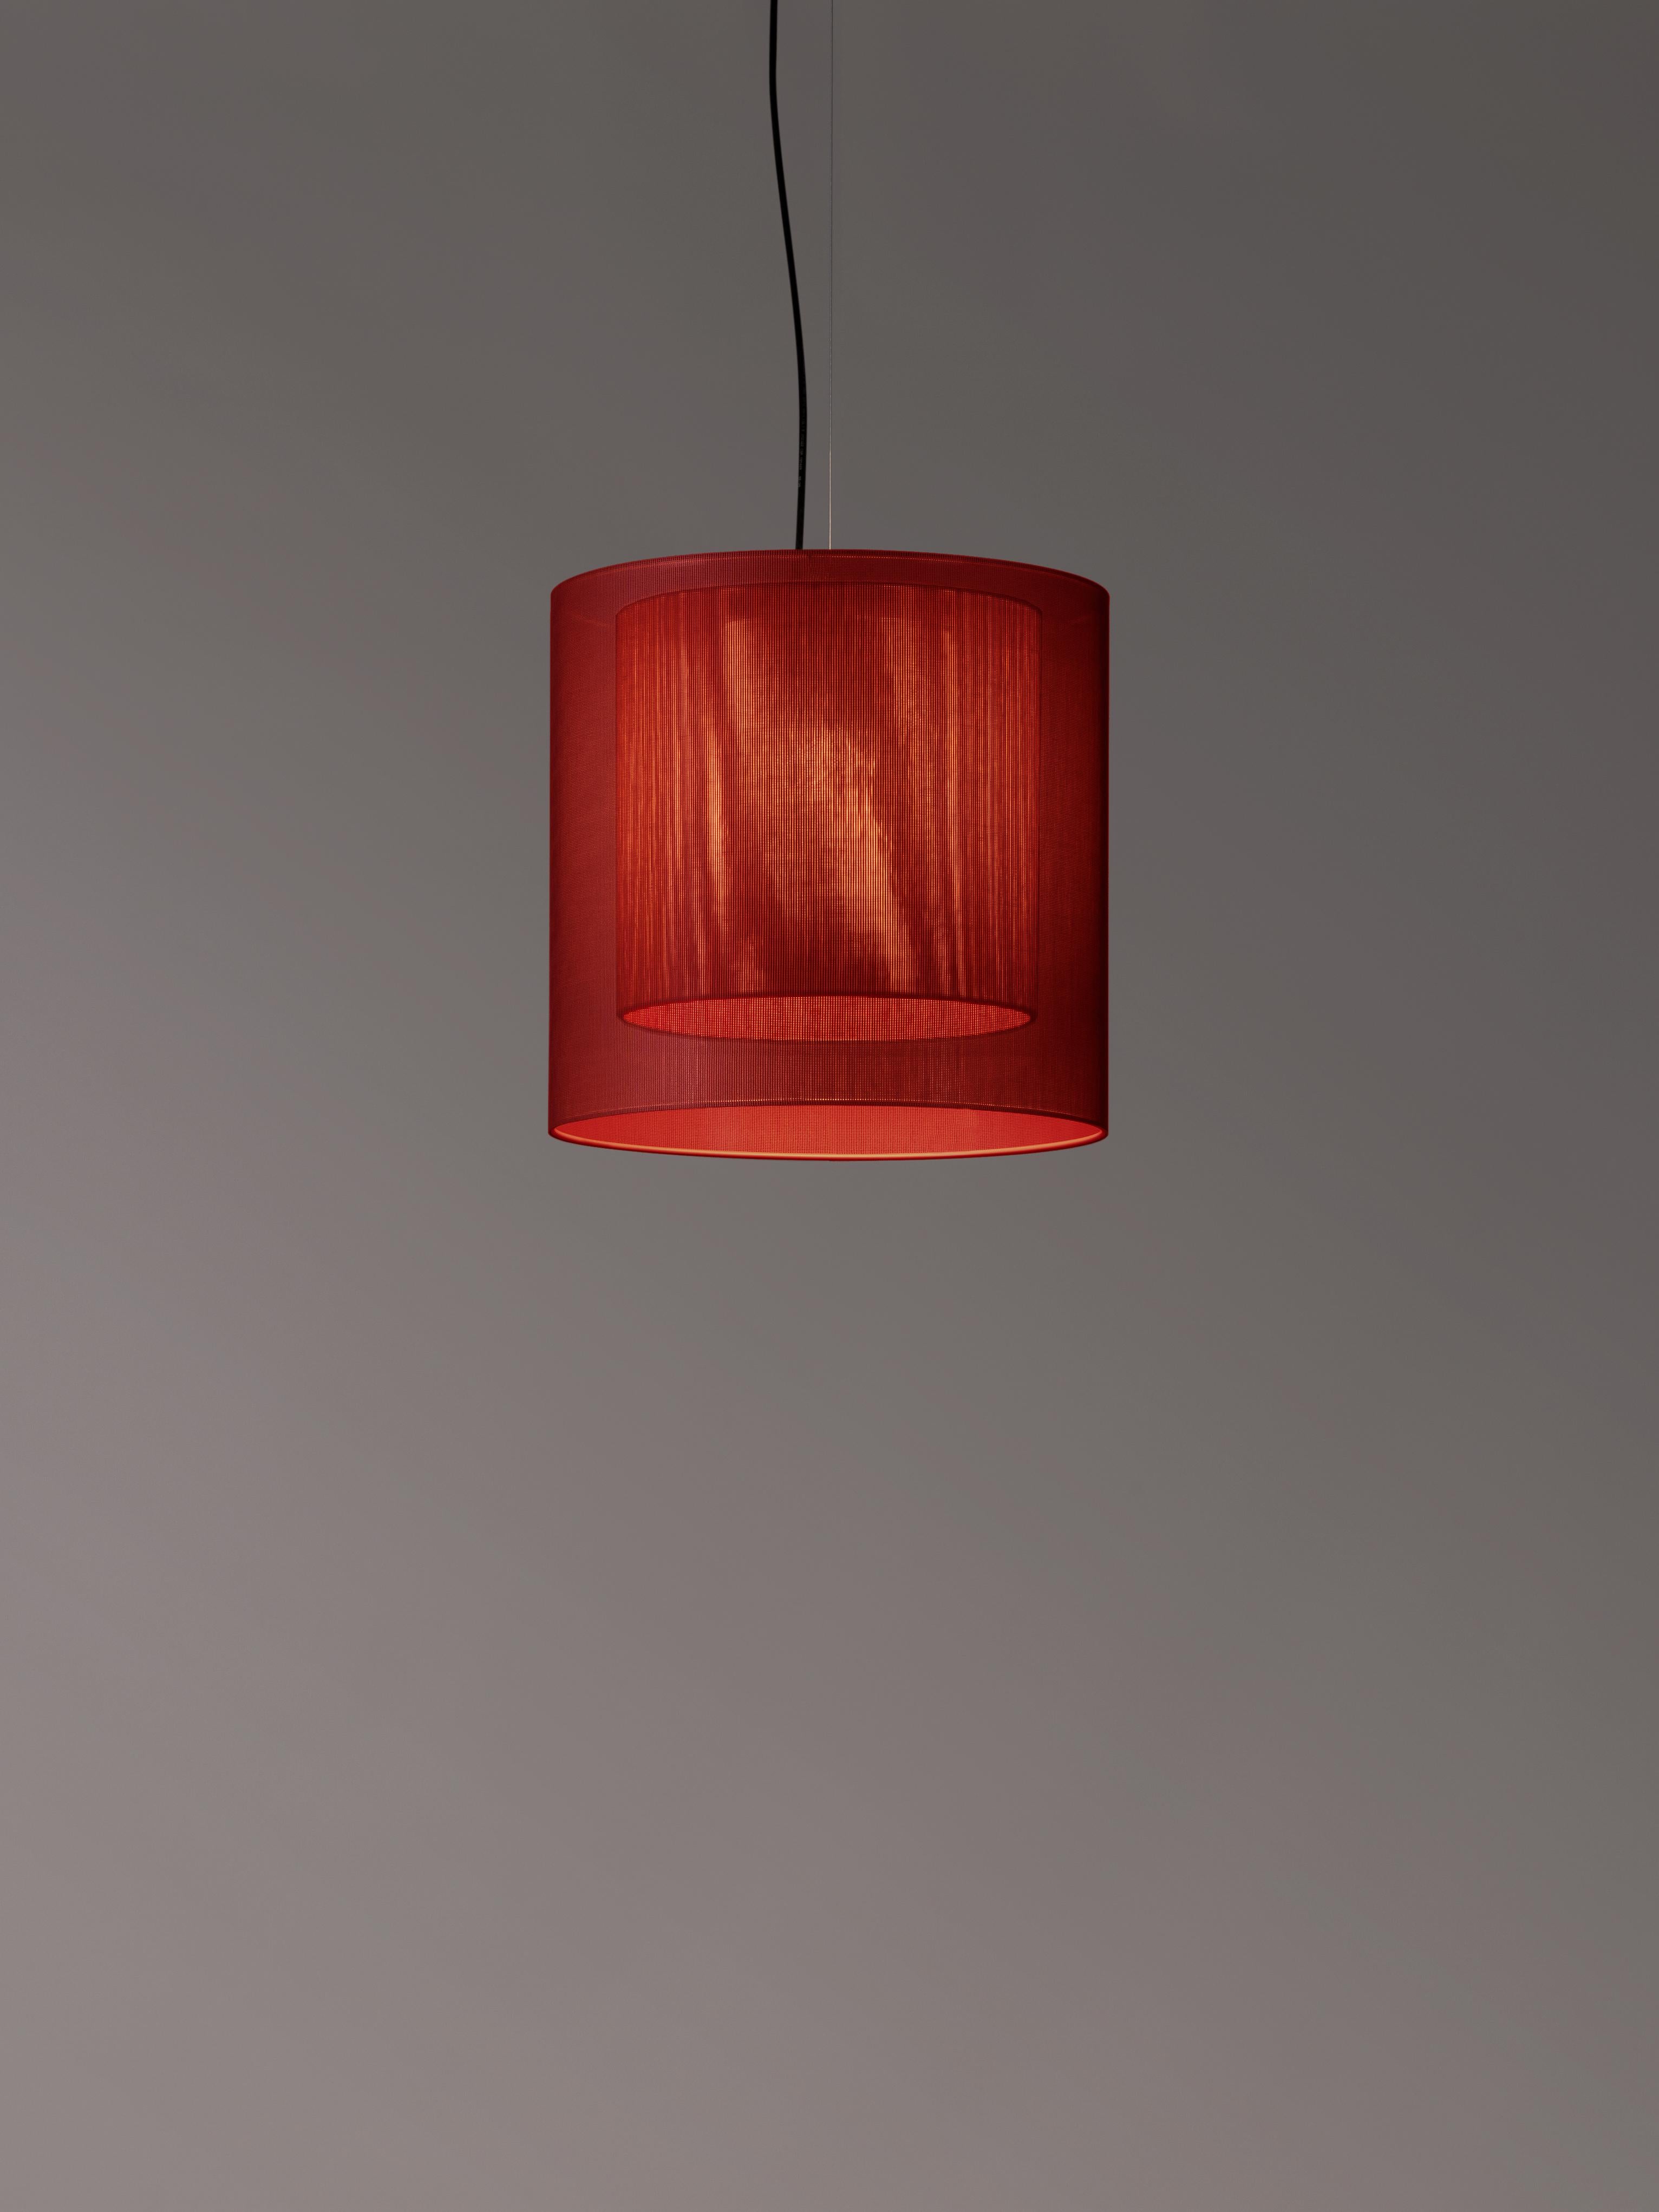 Red Moaré MS pendant lamp by Antoni Arola
Dimensions: D 46 x H 45 cm
Materials: Metal, polyester.
Available in other colors and sizes.

Moaré’s multiple combinations of formats and colours make it highly versatile. The series takes its name